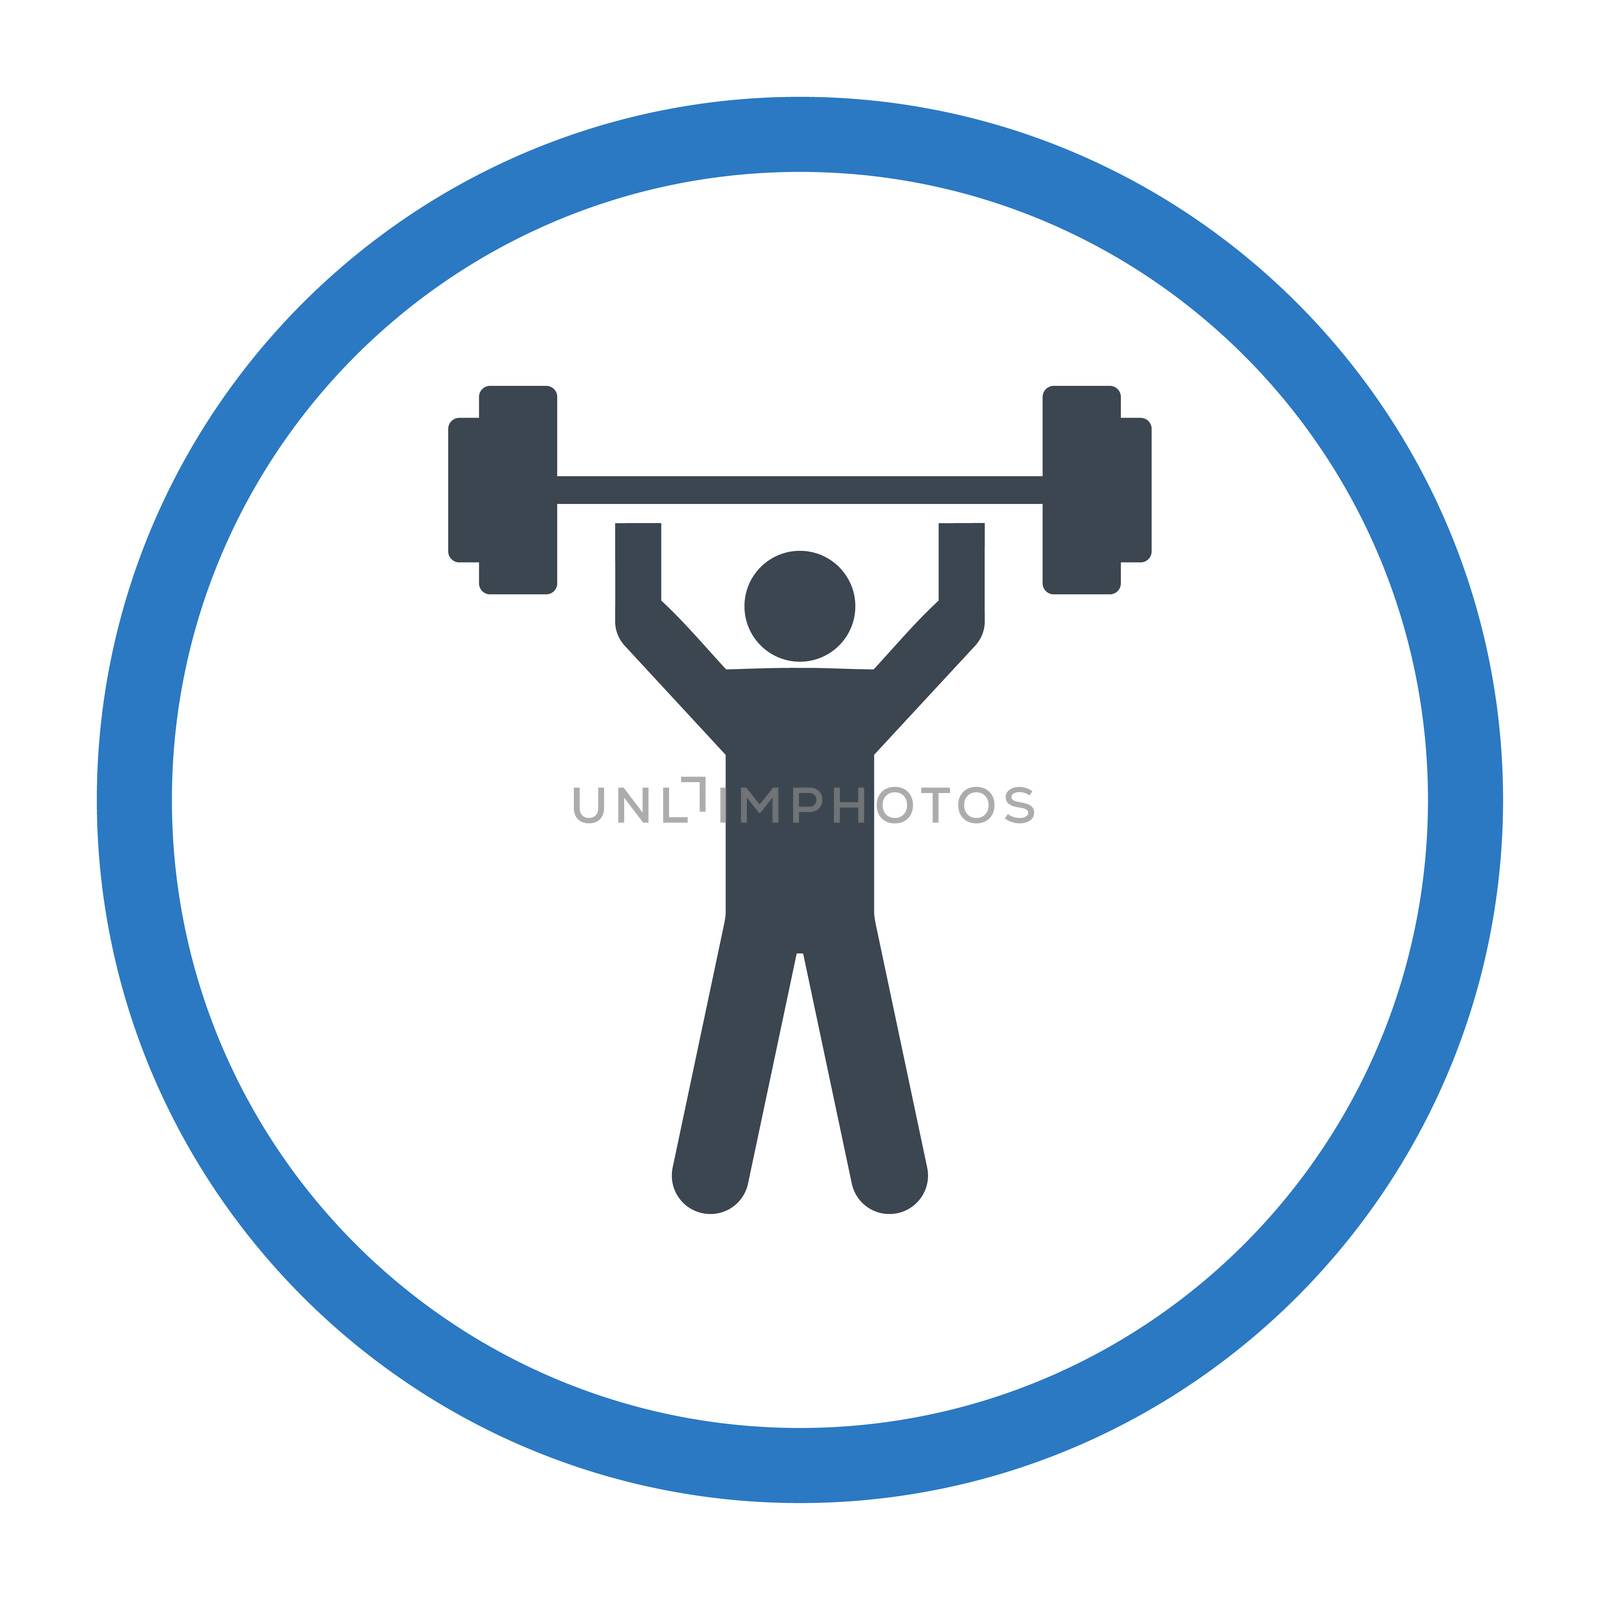 Power lifting glyph icon. This rounded flat symbol is drawn with smooth blue colors on a white background.